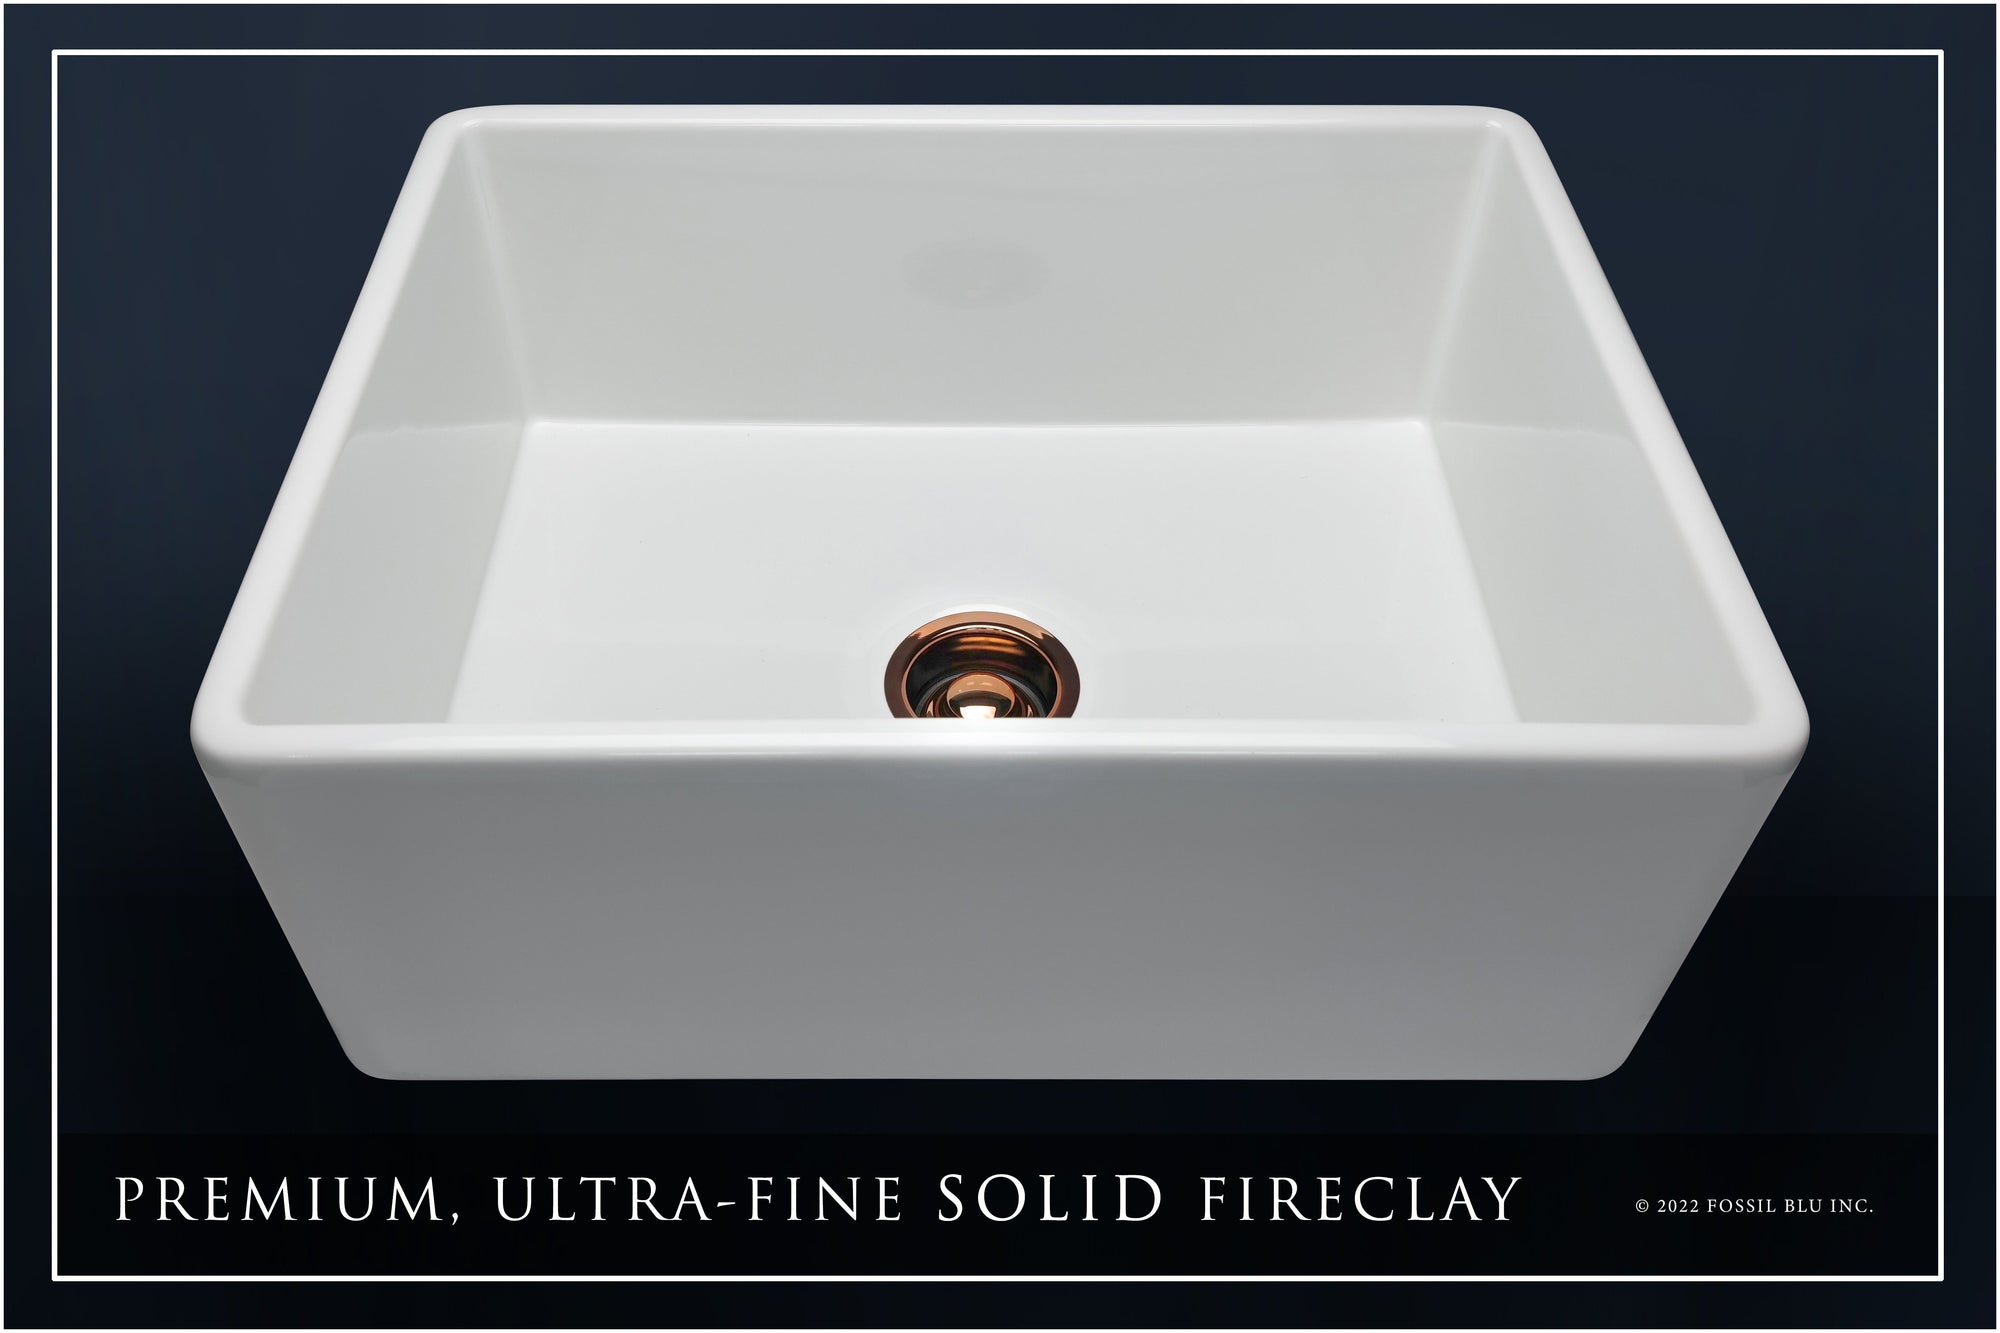 FSW1000RG LUXURY 26-INCH SOLID FIRECLAY FARMHOUSE SINK IN WHITE, POL. ROSE GOLD ACCS, FLAT FRONT